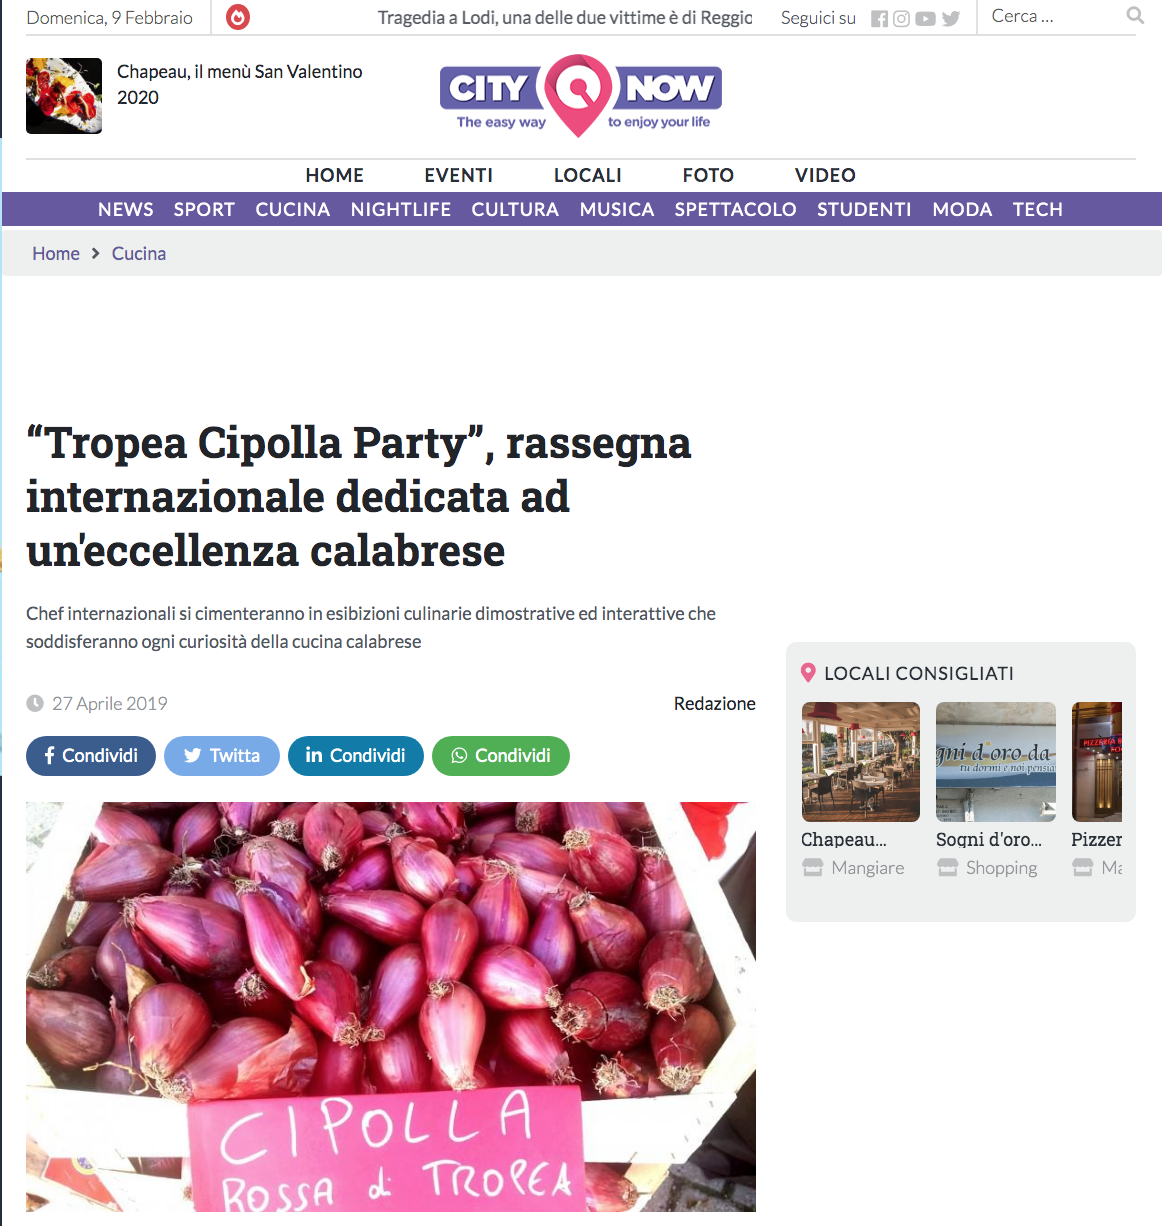 citynow_cipolladitropea_party.png